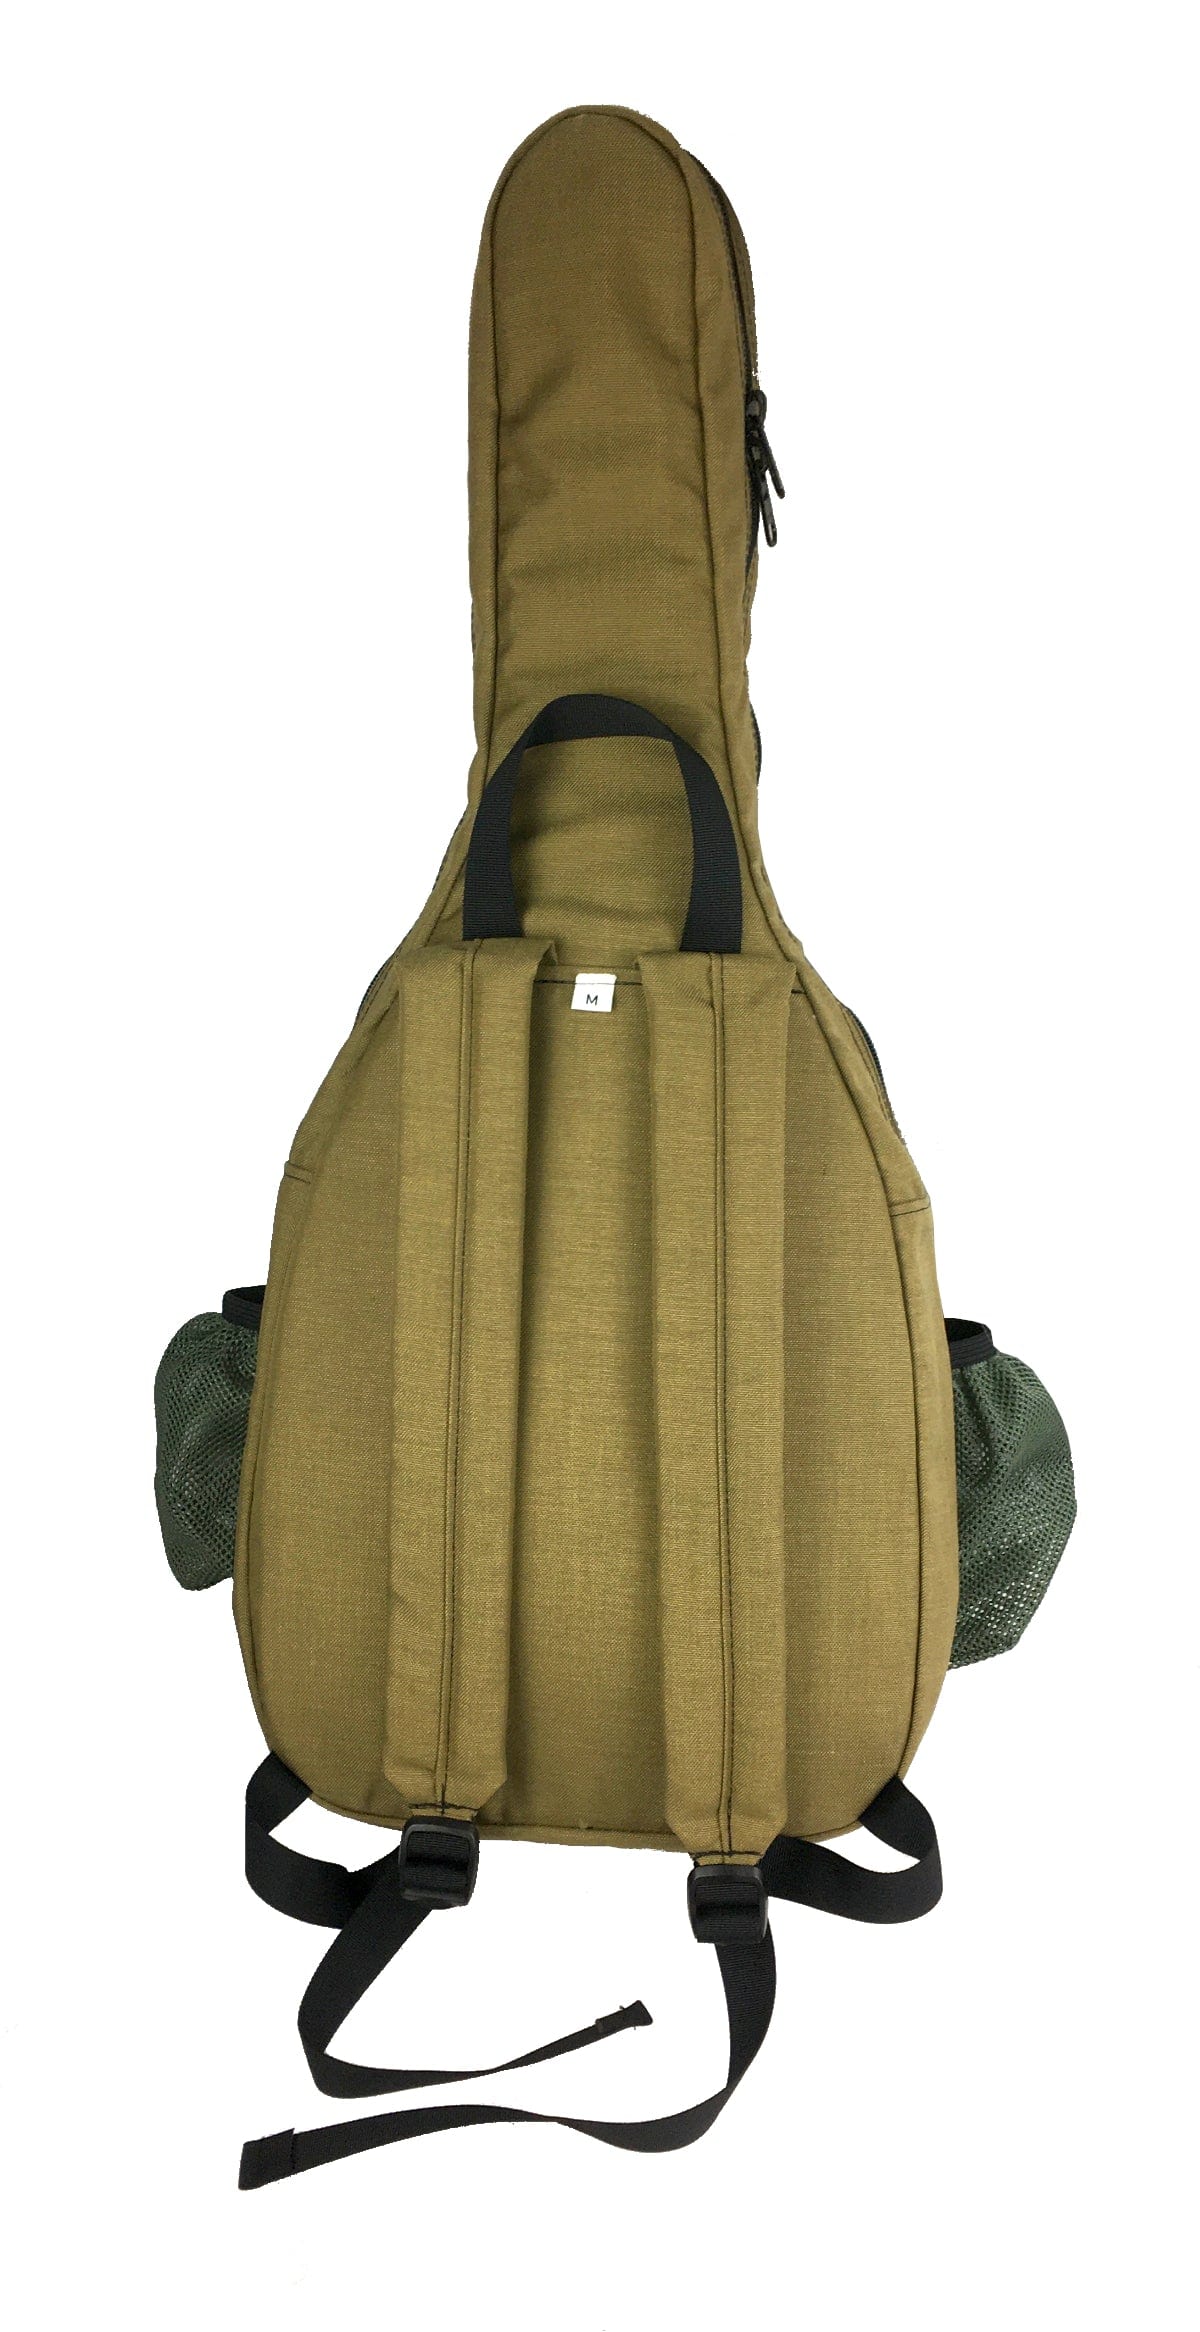 Made in USA TENNR BACKPACK DELUXE 